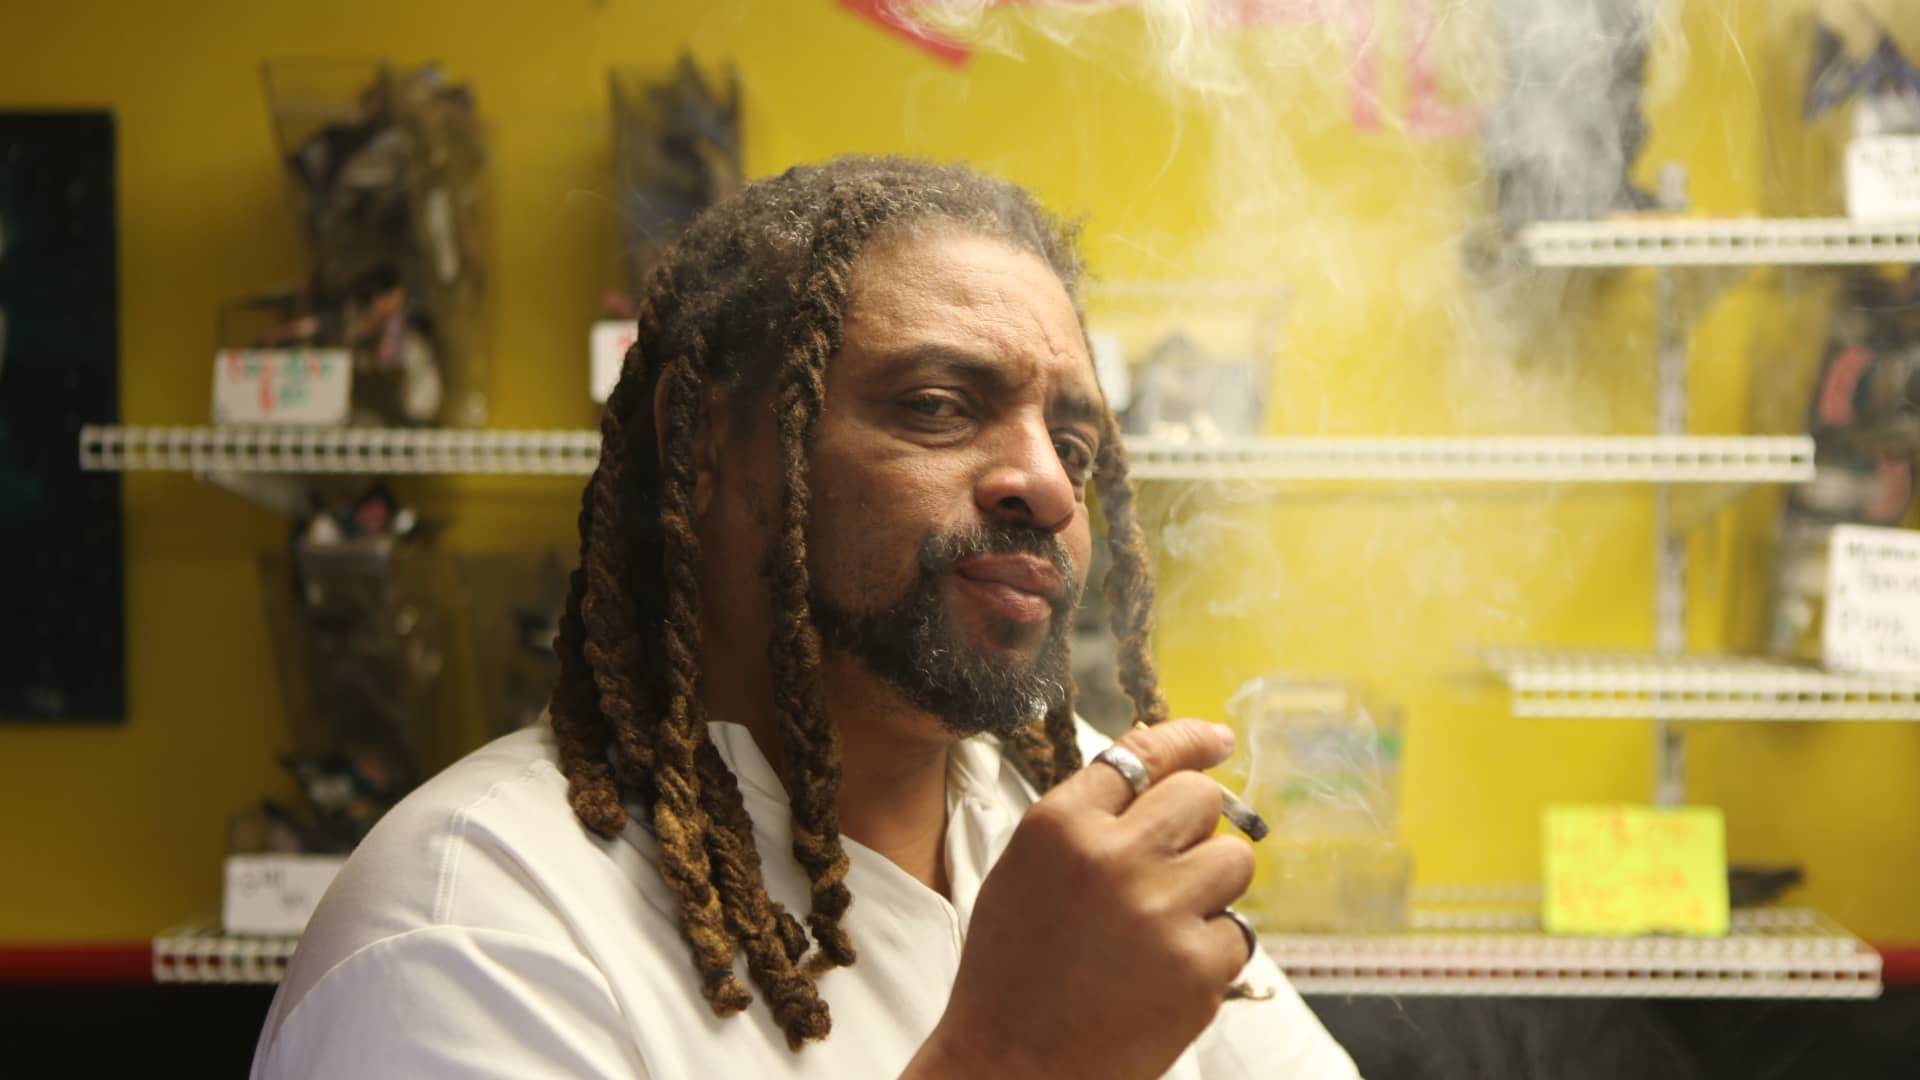 Ed Forchion smokes marijuana in his dispensary located across the street from Trenton City Hall. His decision to go legit concludes a decades-long saga of arrests, raids, court battles and stints in prison.